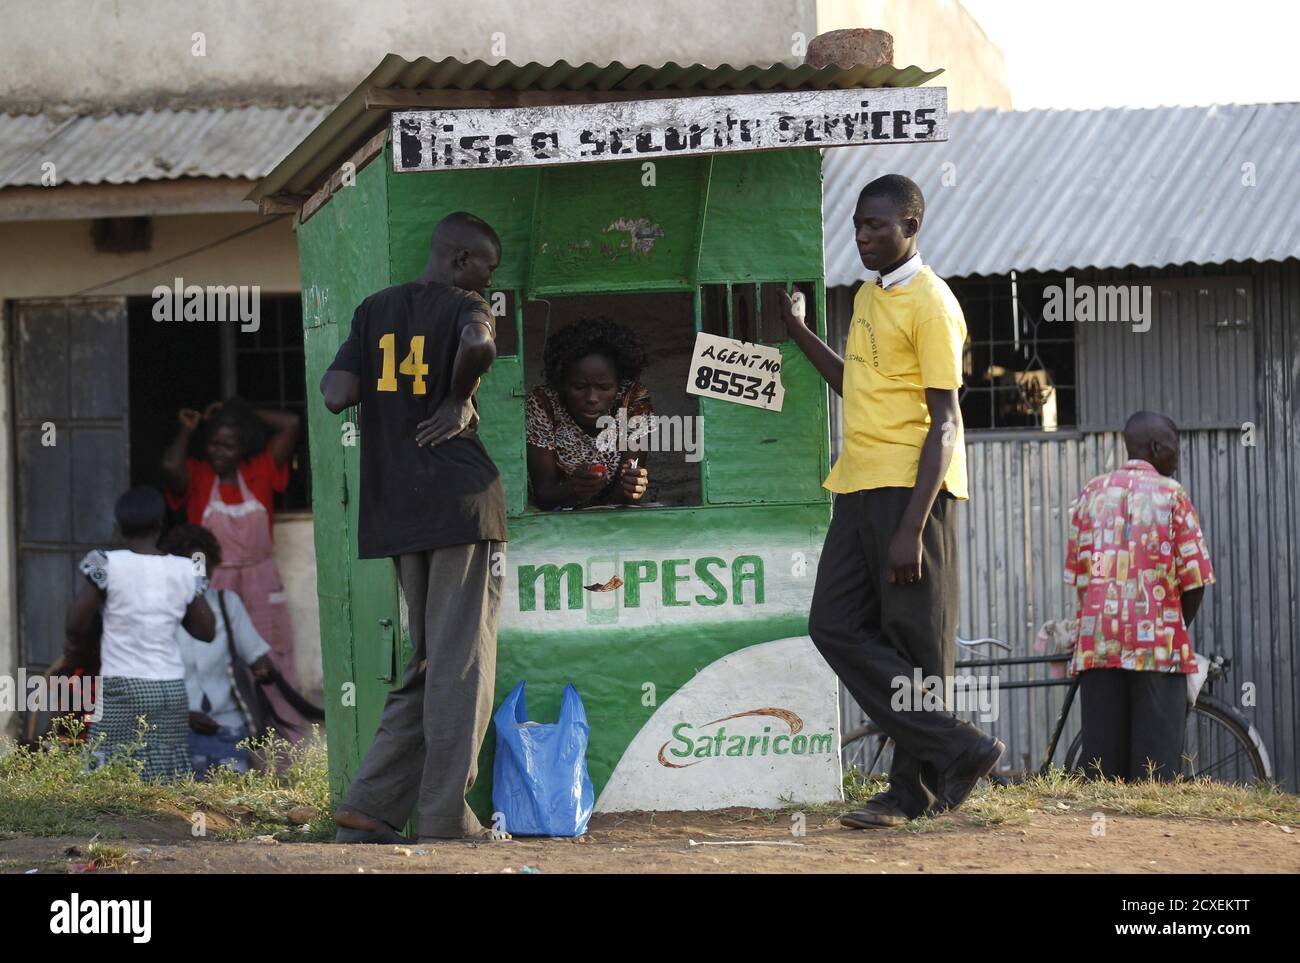 Residents perform at a mobile phone transaction at a stall within the trading centre of the U.S. President Barack Obama's ancestral village of Nyang'oma Kogelo, west of Kenya's capital Nairobi, July 15, 2015. President Obama visits Kenya and Ethiopia in July, his third major trip to Sub-Saharan Africa after travelling to Ghana in 2009 and to Tanzania, Senegal and South Africa in 2011. He has also visited Egypt, in North Africa, and South Africa for Nelson Mandela's funeral. Obama will be welcomed by a continent that had expected closer attention from a man they claim as their son, a sentiment  Stock Photo